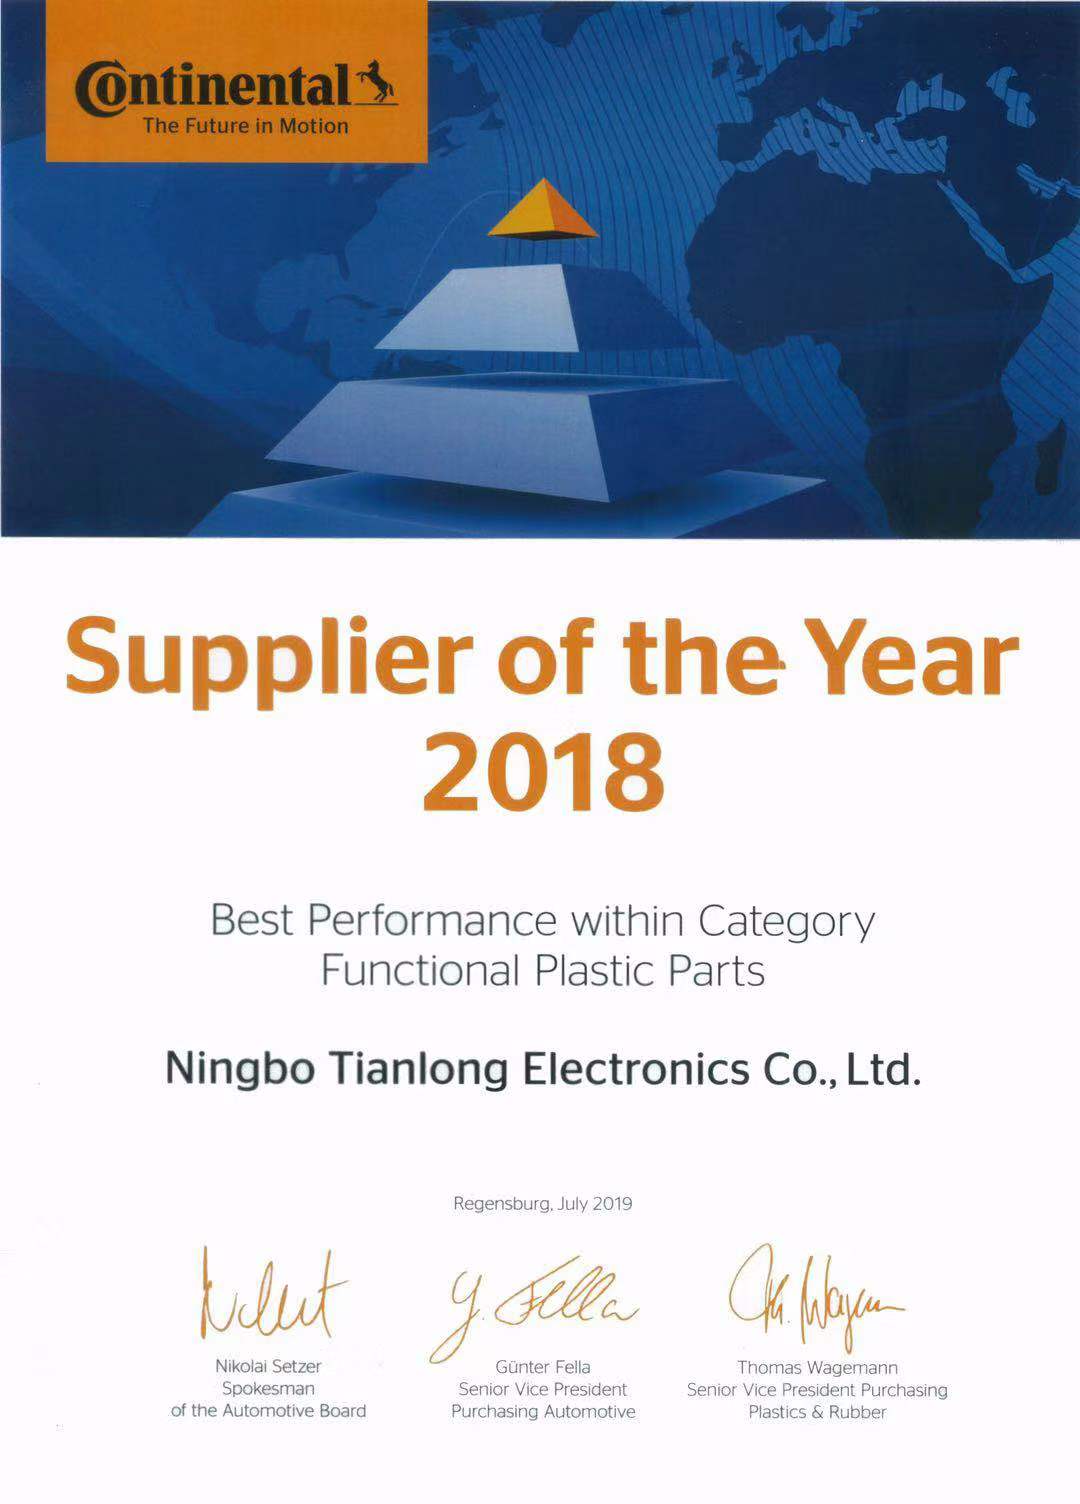 Supplier of the Year - Conti 2018